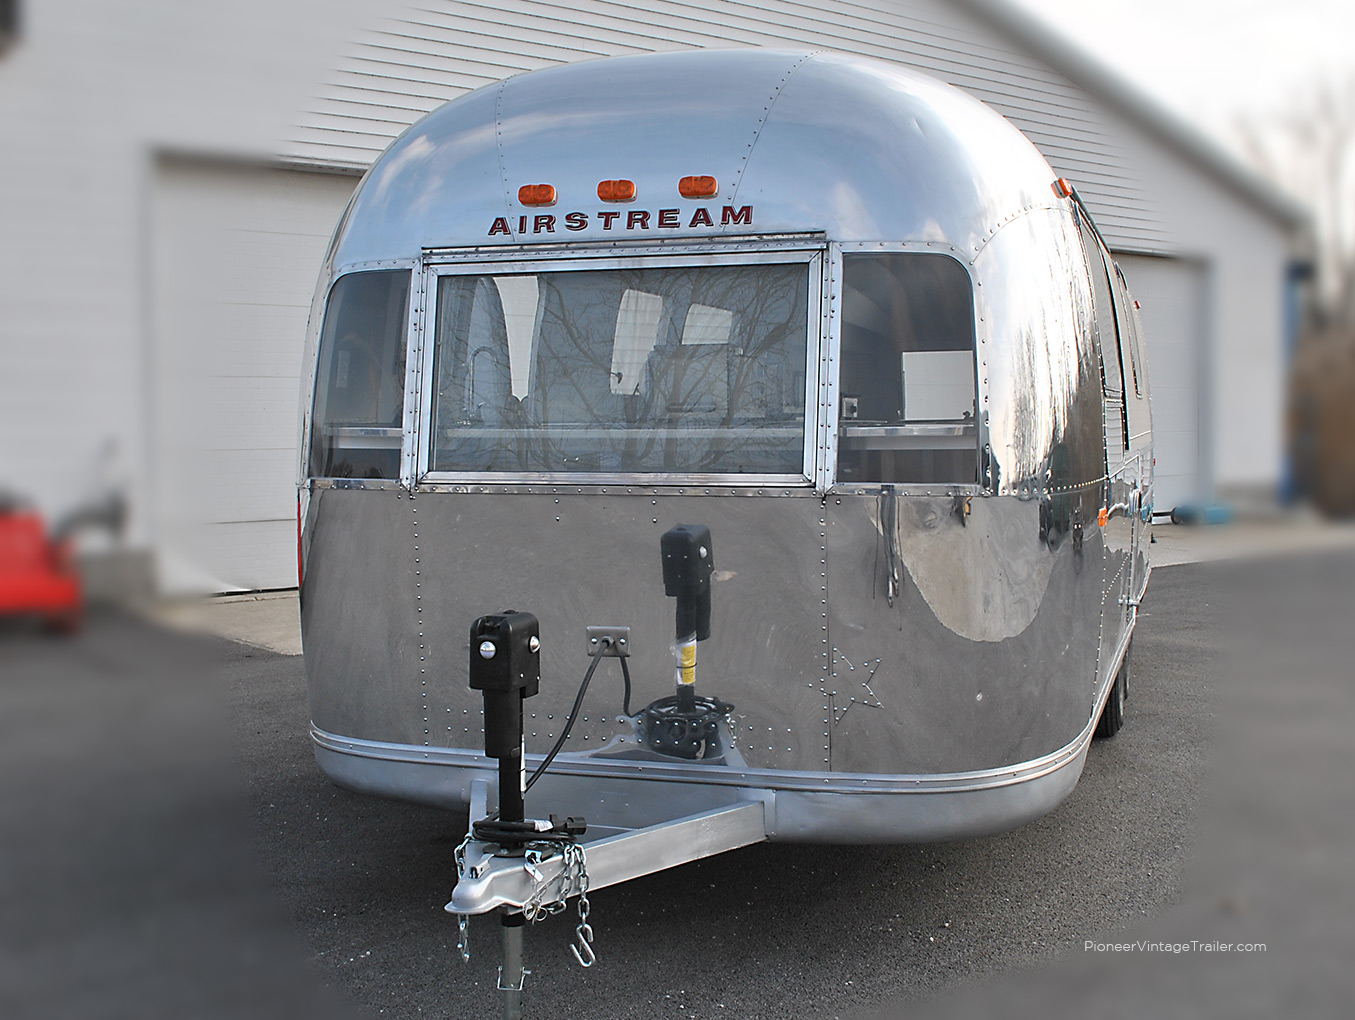 Airstream coffee vending trailer - front view